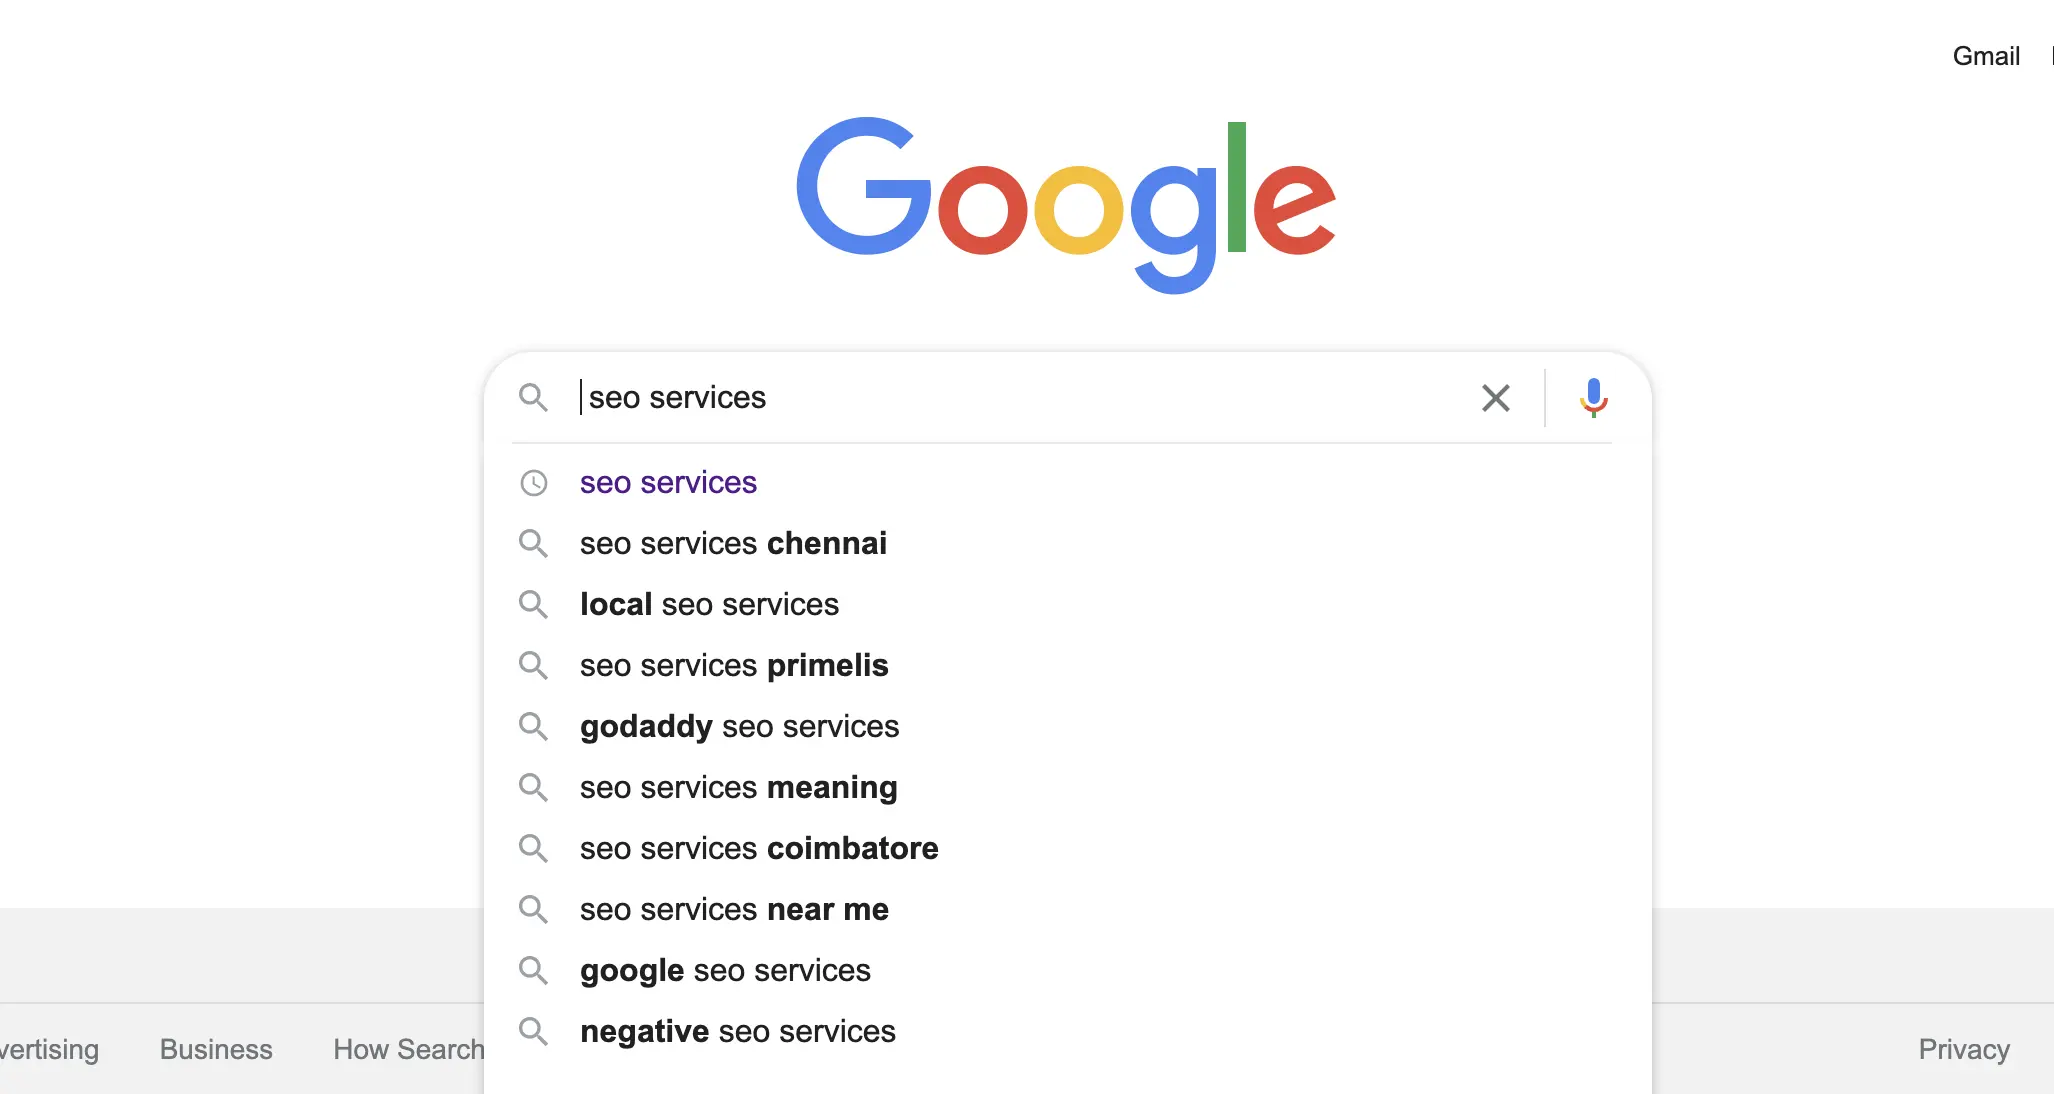 Google Autofill - Space before search terms